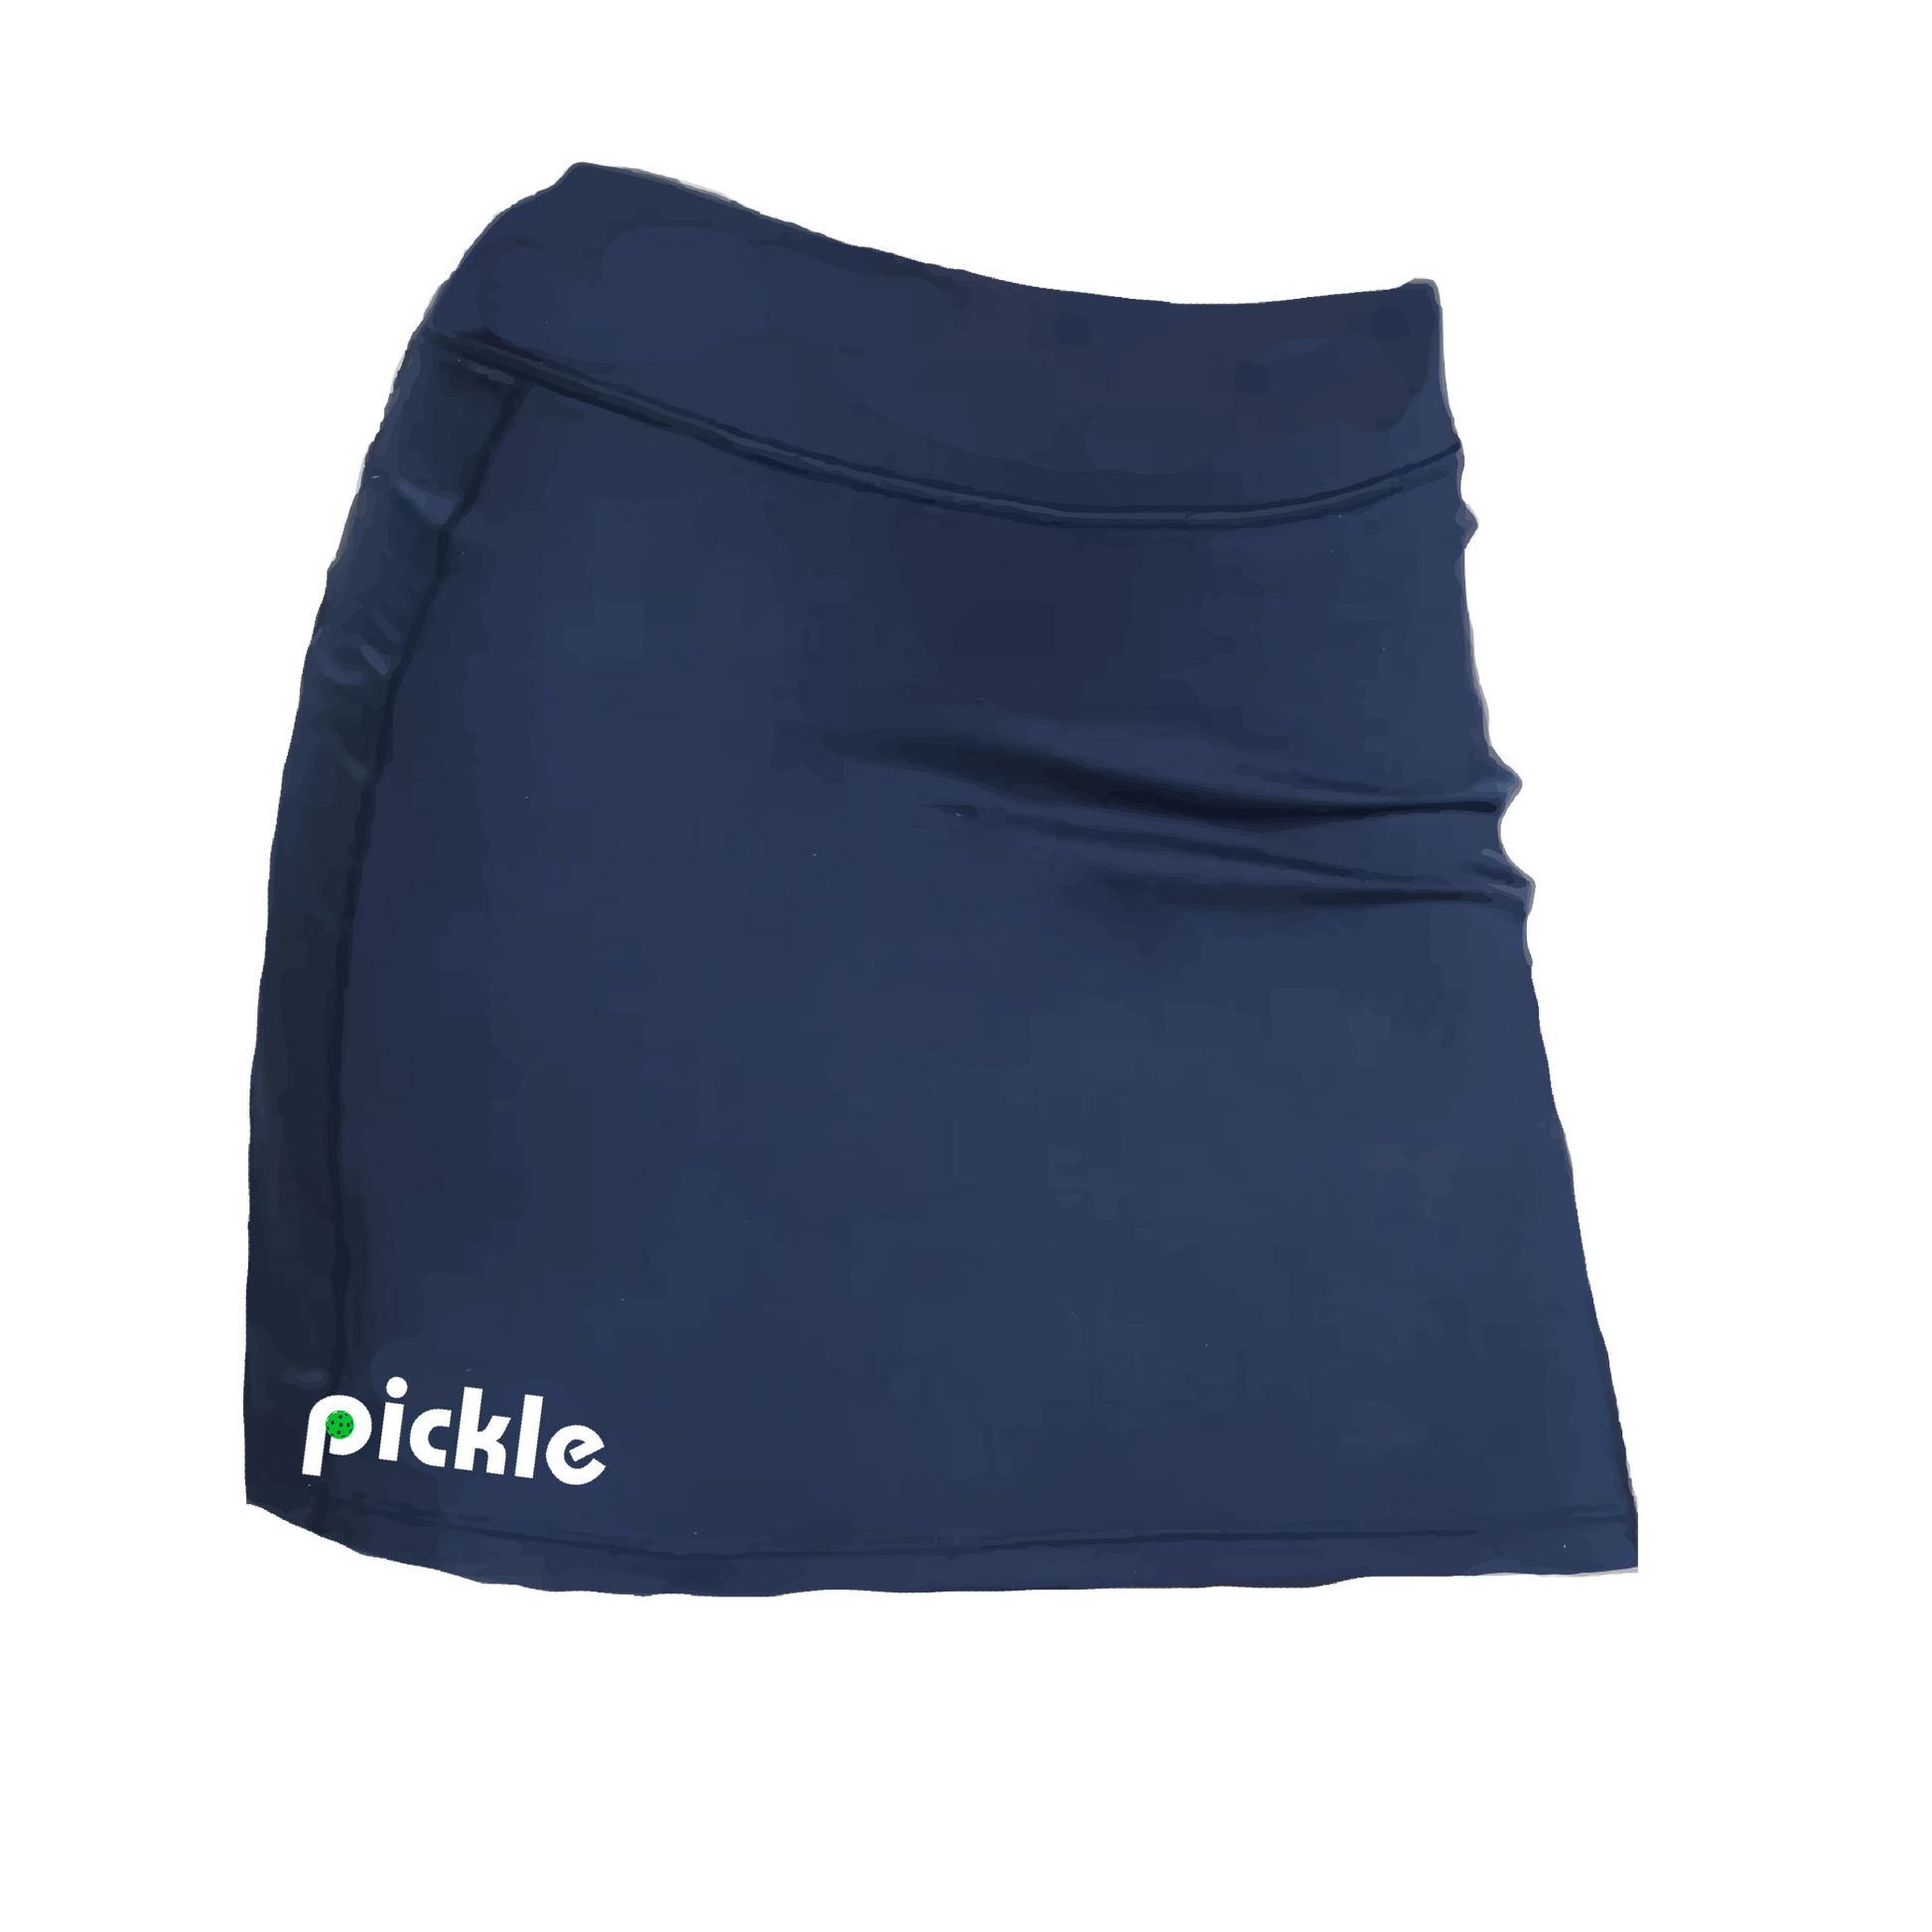 Women’s core active jersey-knit pickleball skort comes with built-in shorts made out of a poly-spandex blend that will keep your legs from rubbing together, without which often results in painful chafing. You can also feel secure knowing that no matter how strenuous the exercise, the skort will remain in place (it won’t ride up!). The fabric is breathable, featuring Dri-Works wicking technology.